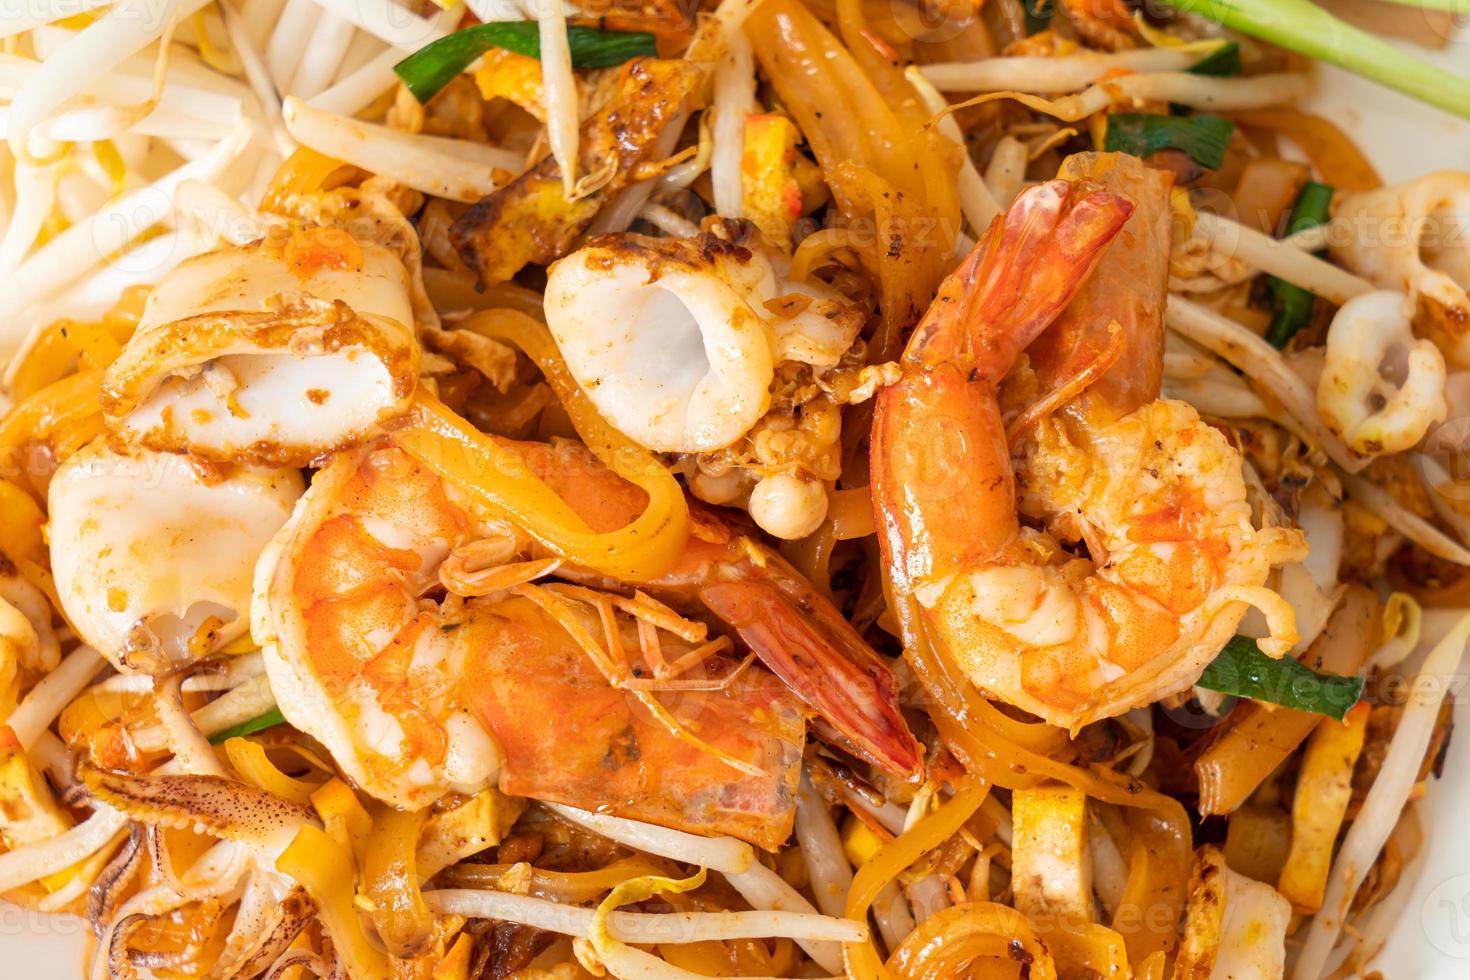 Pad Thai Seafood - Stir fried noodles with shrimps, squid or octopus photo